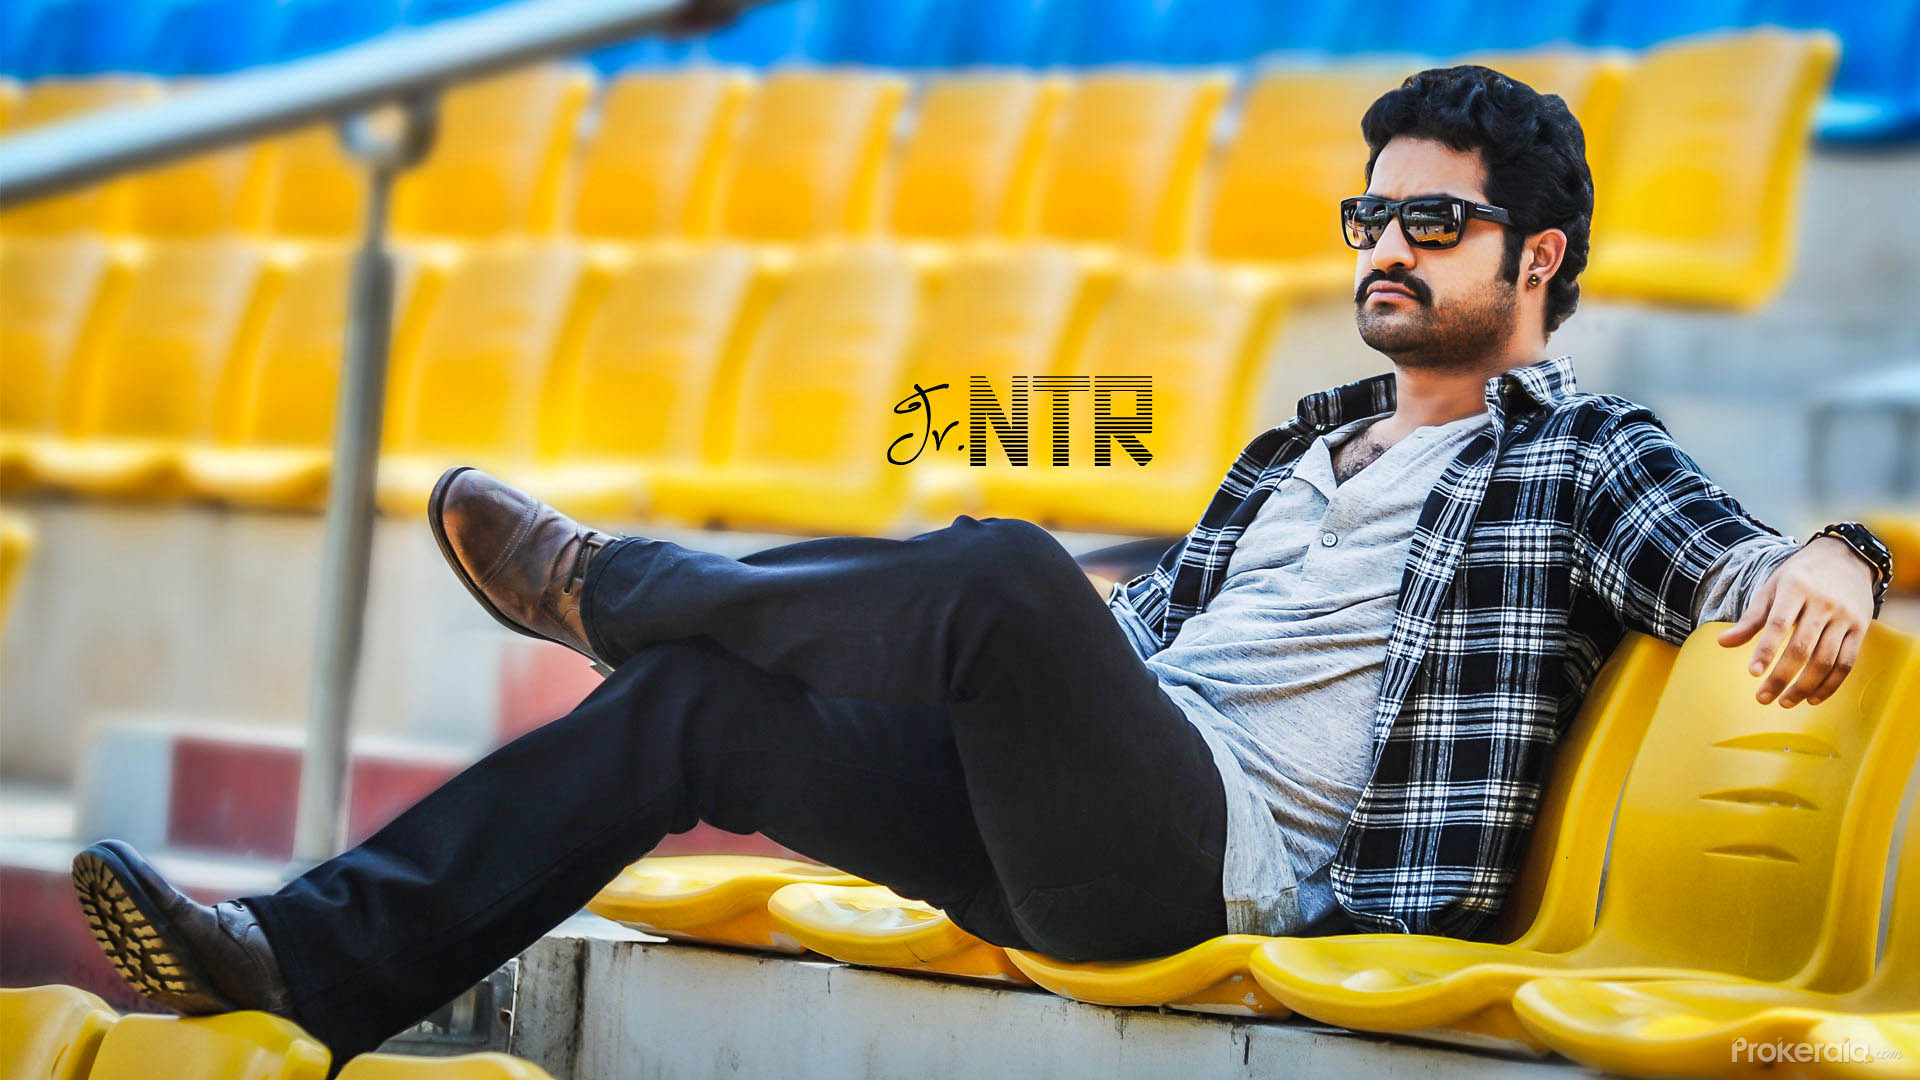 ntr wallpapers download,yellow,sitting,cool,fun,jeans